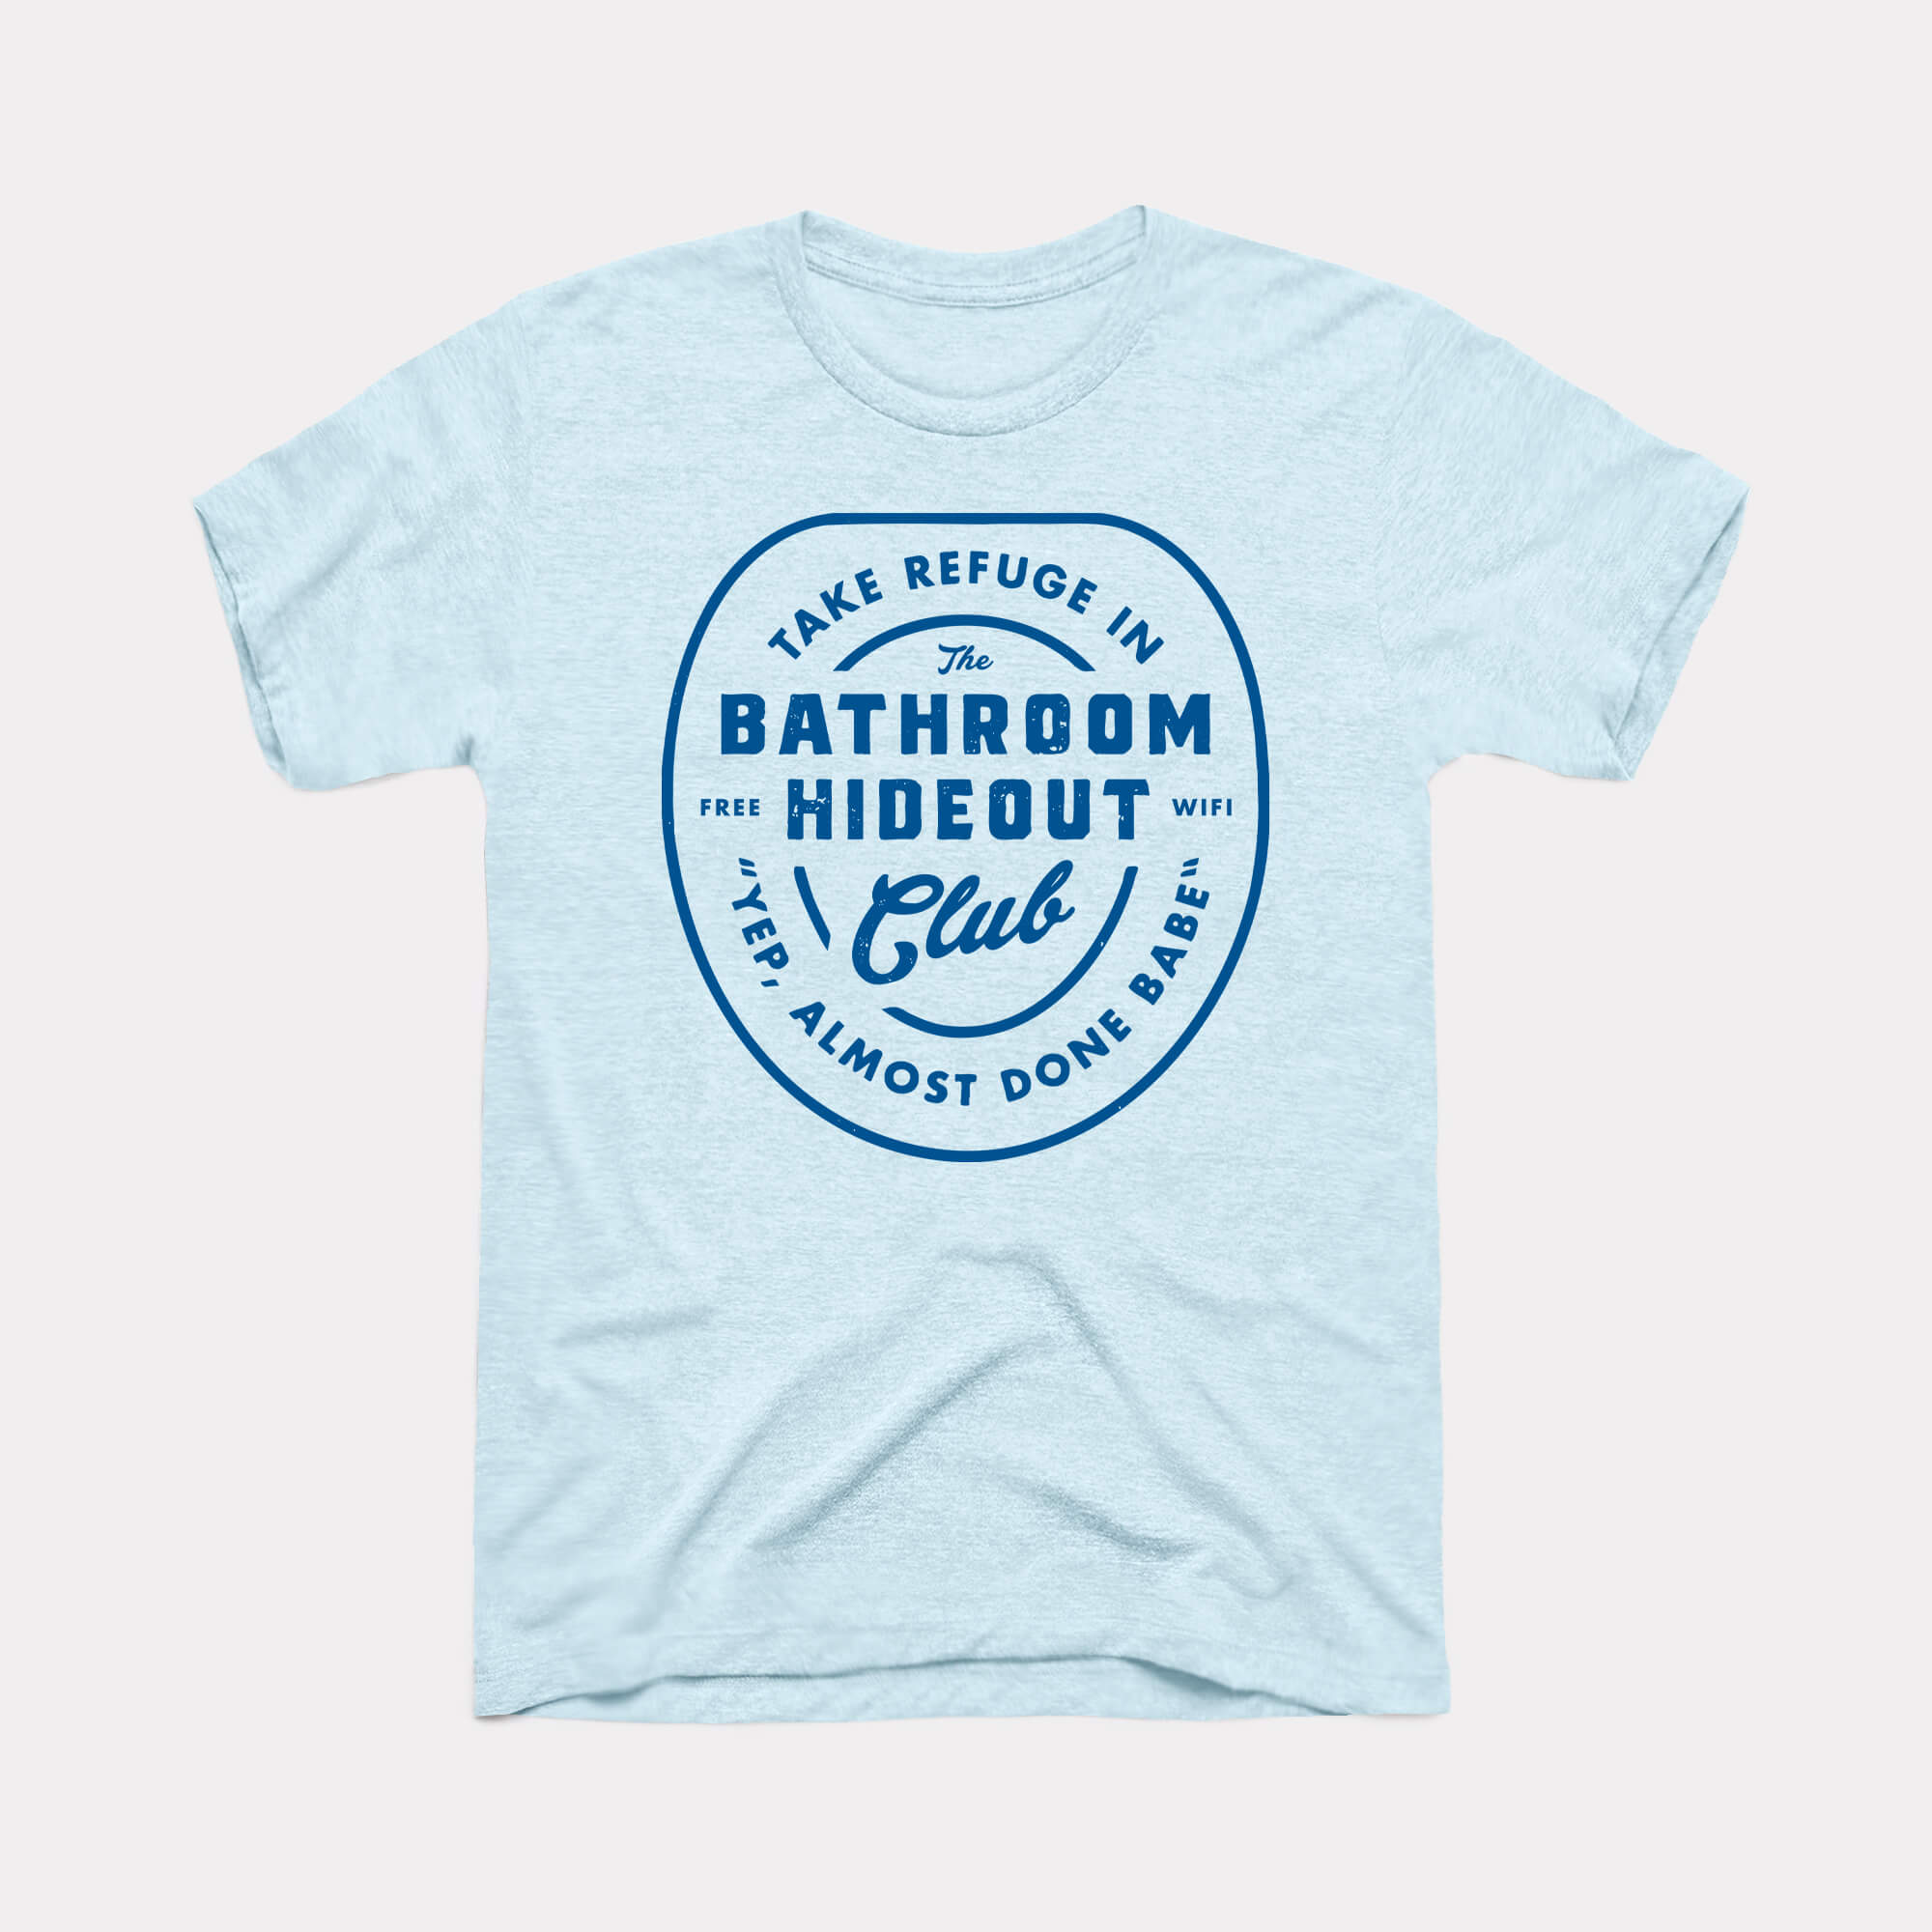 Adult Tee in Blue